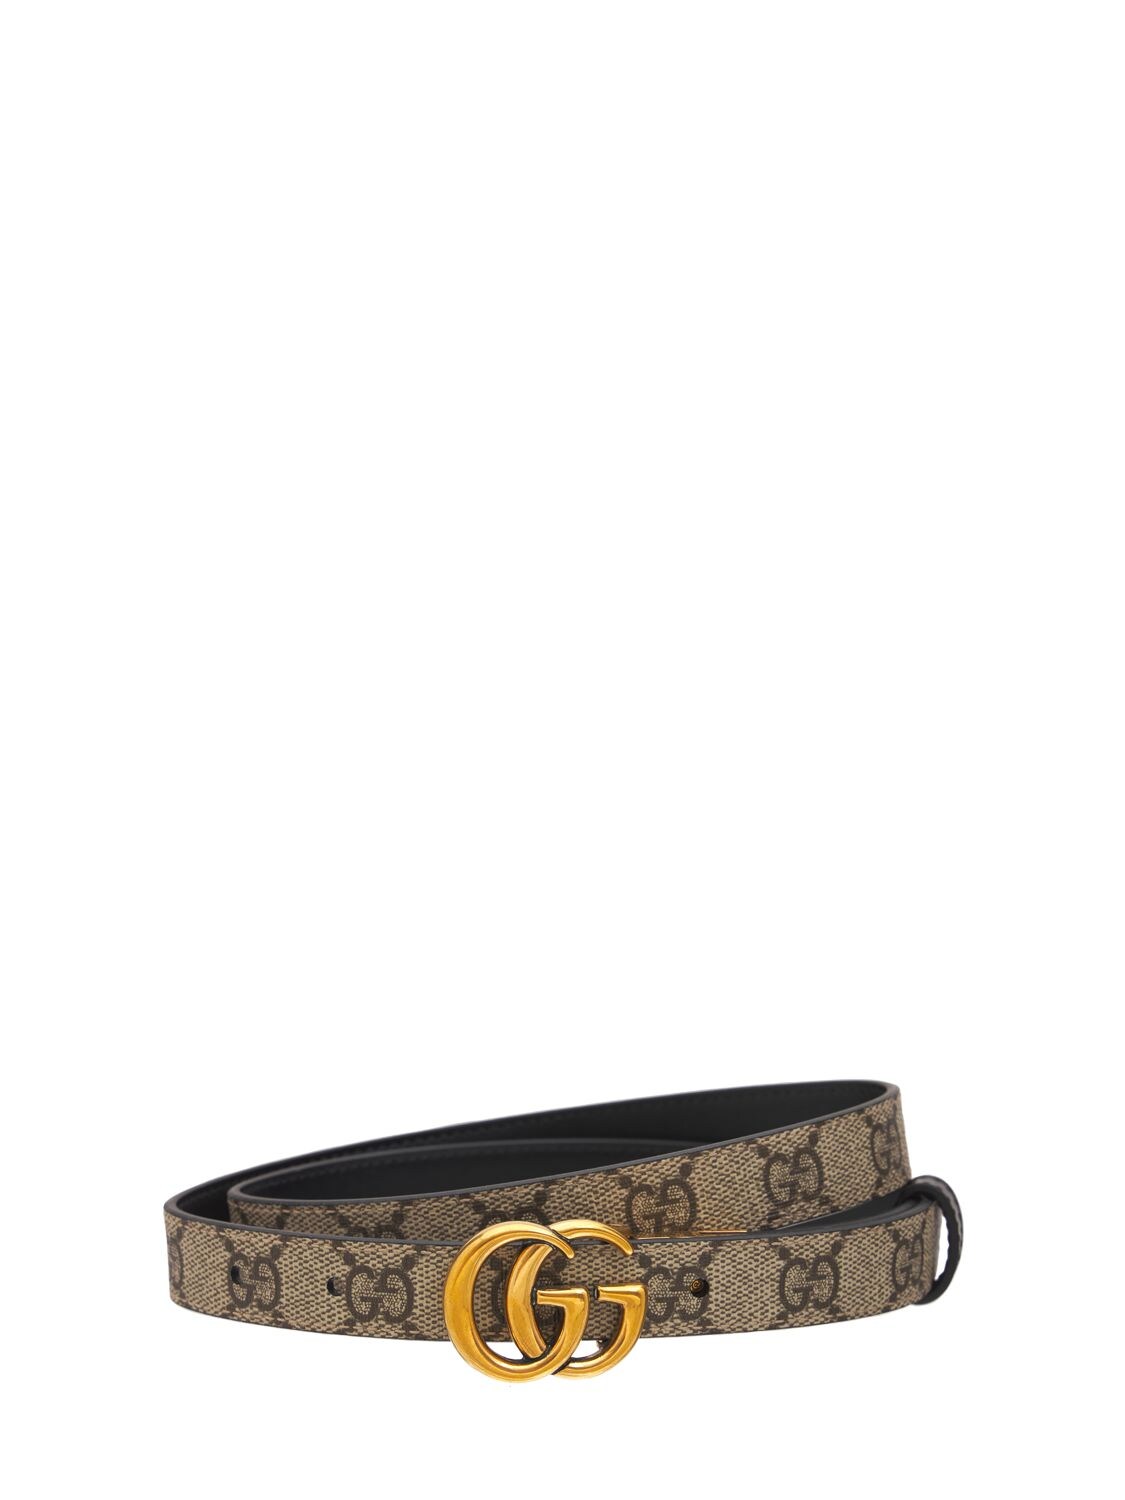 GG Marmont Thin Leather Belt in Beige - Gucci